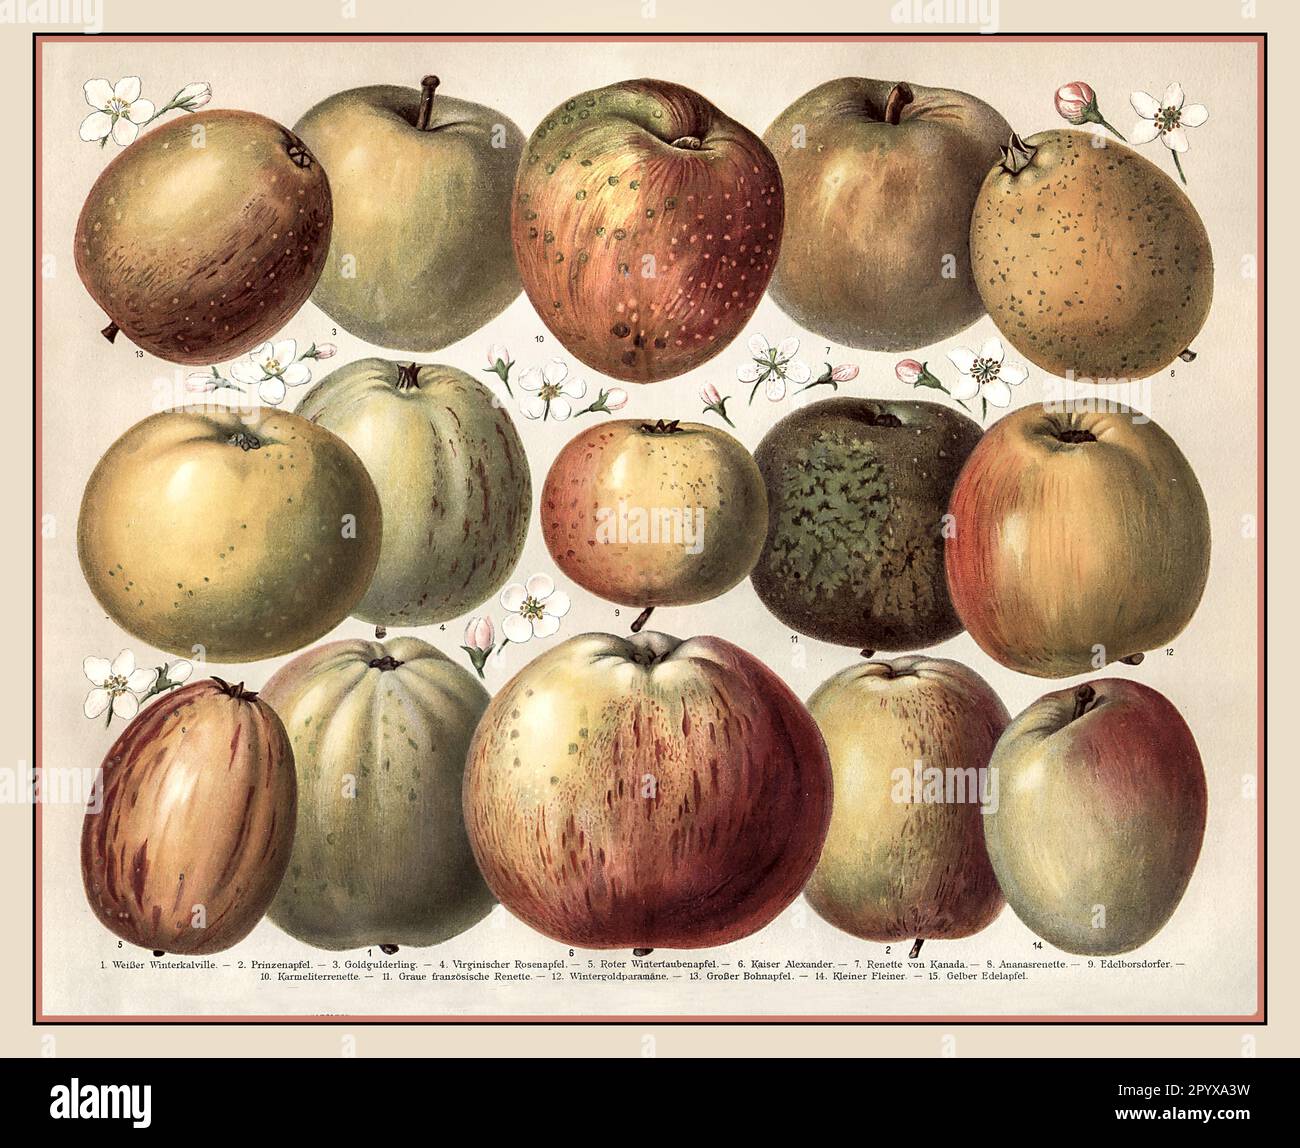 APPLES SYNOPSIS CHART Vintage 1900s Lithograph Poster Historic Botany Illustration of European Apple Types. Apples Variety Varietal Varieties, with identification description by number Stock Photo